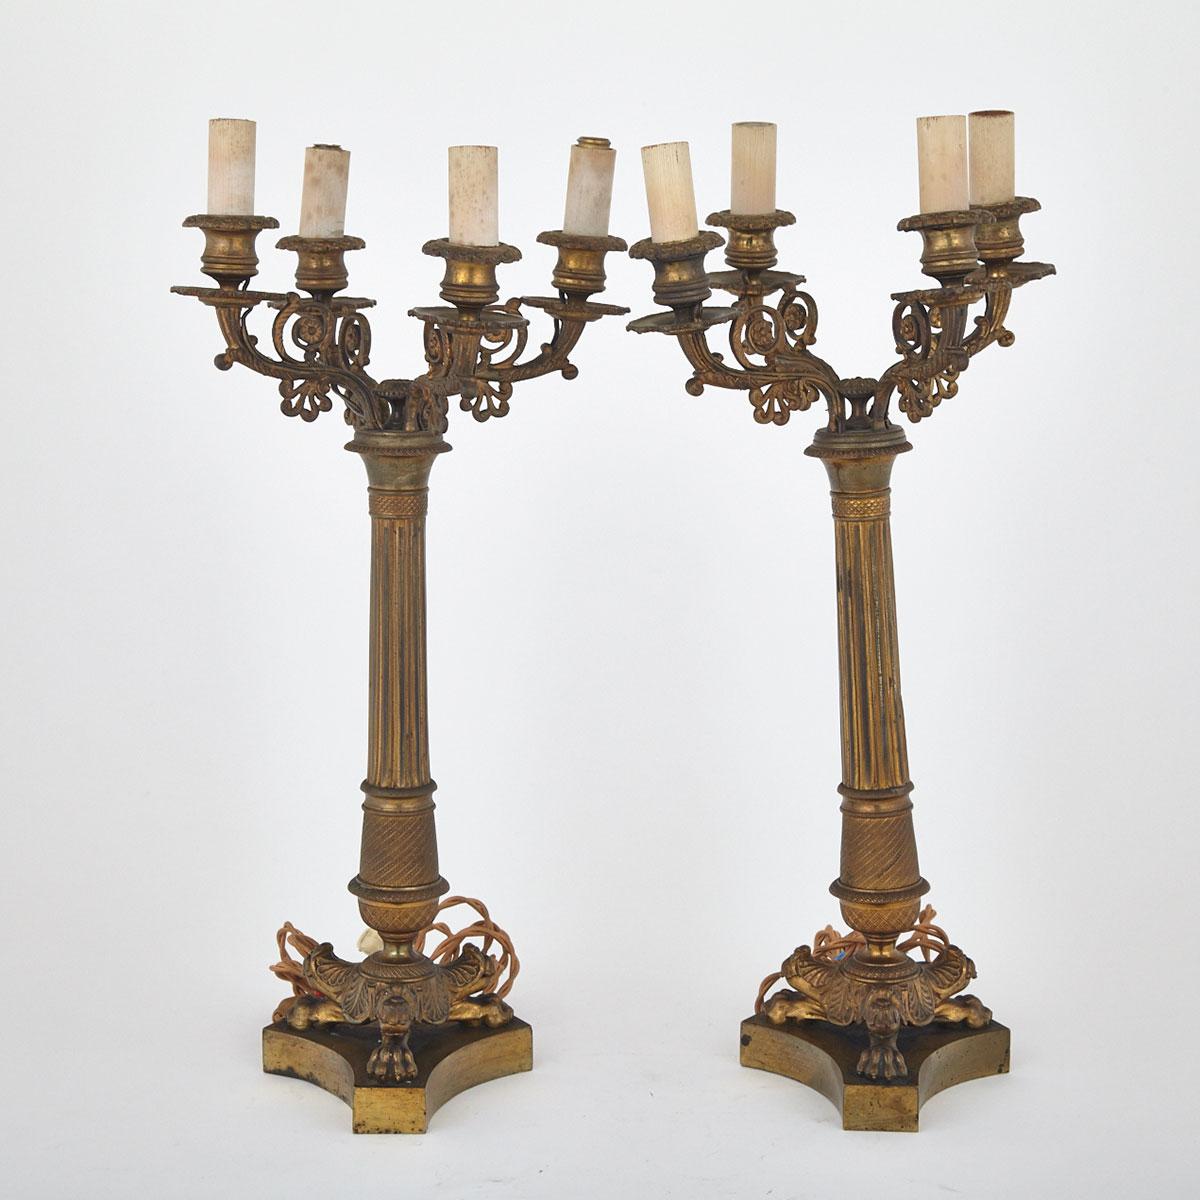 Pair of French Gilt Bronze Candelabra, late 19th century